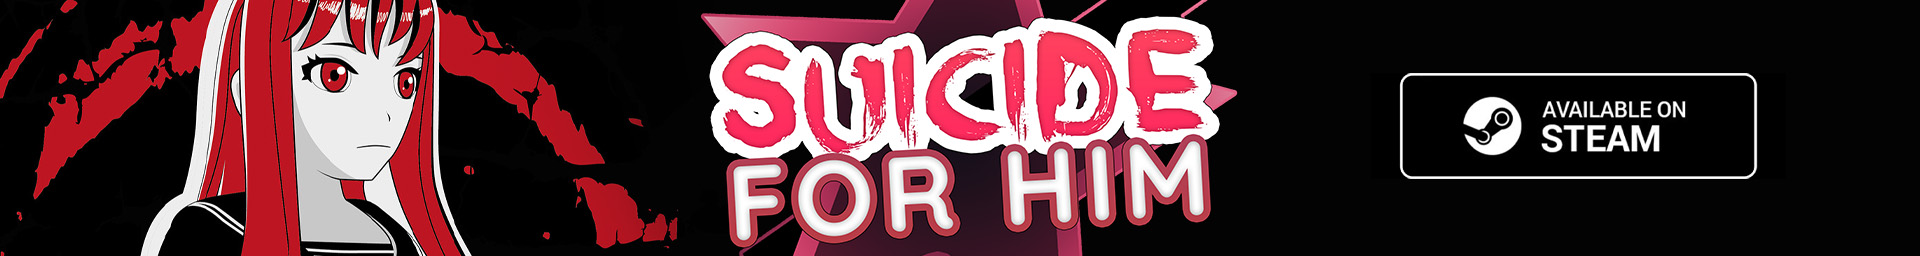 Suicide For Him available on Steam banner